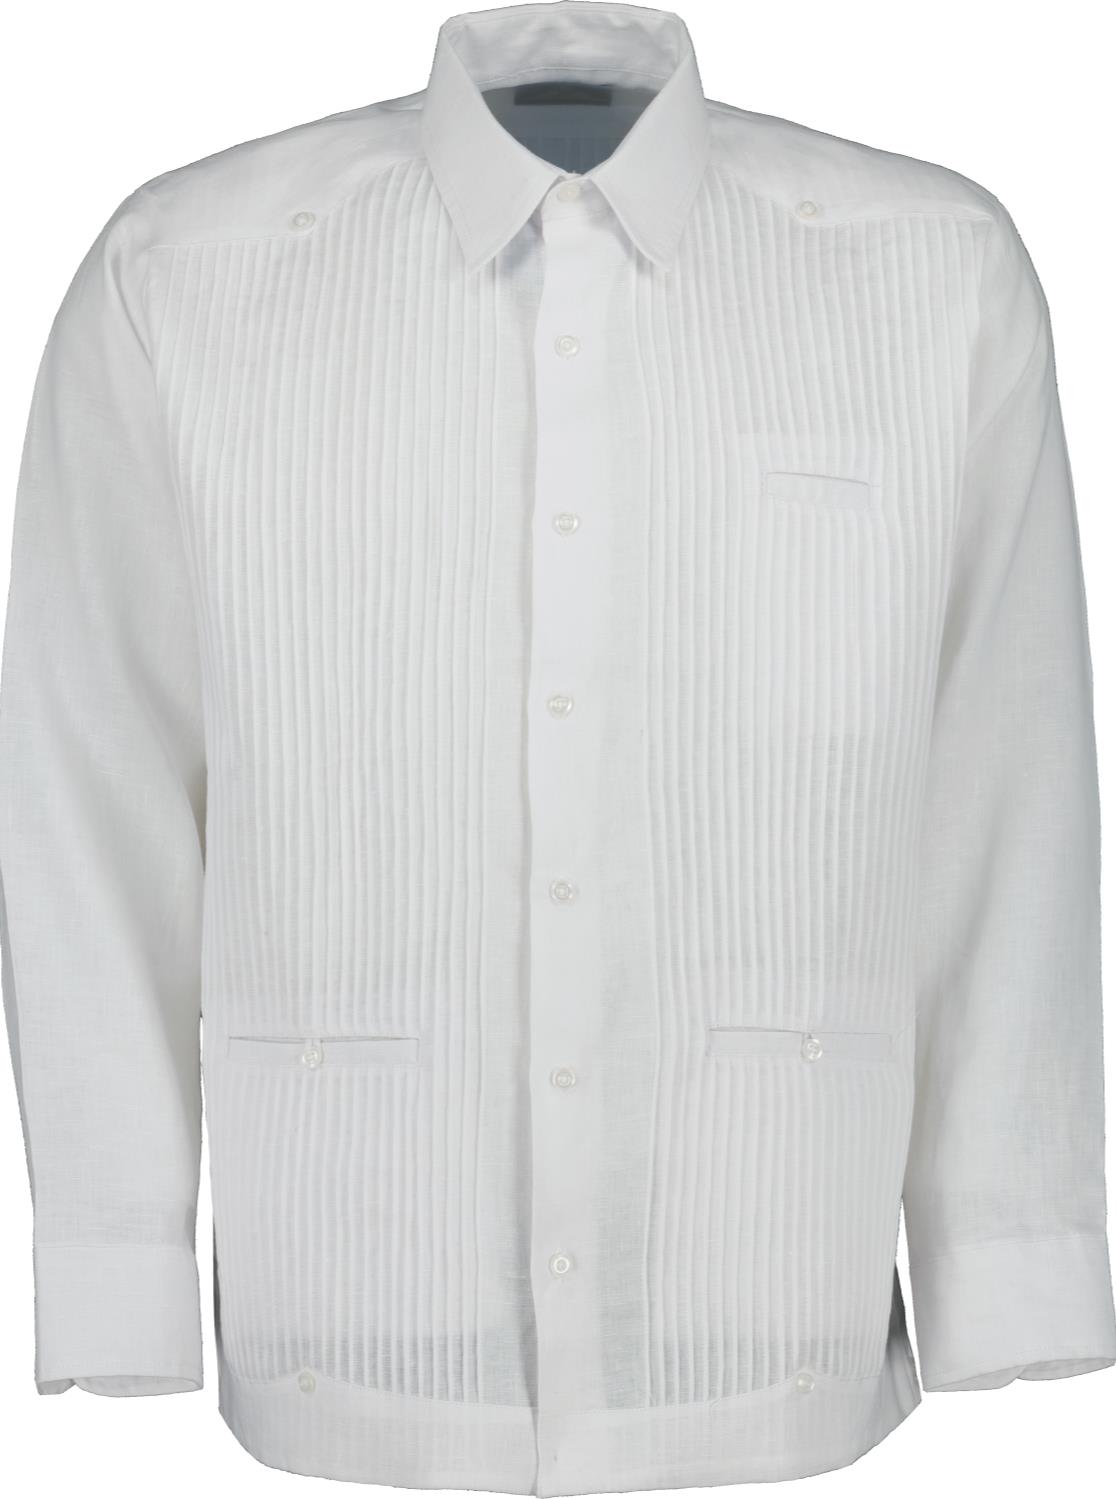 Front view of the white presidential guayabera yucatecan shirt 